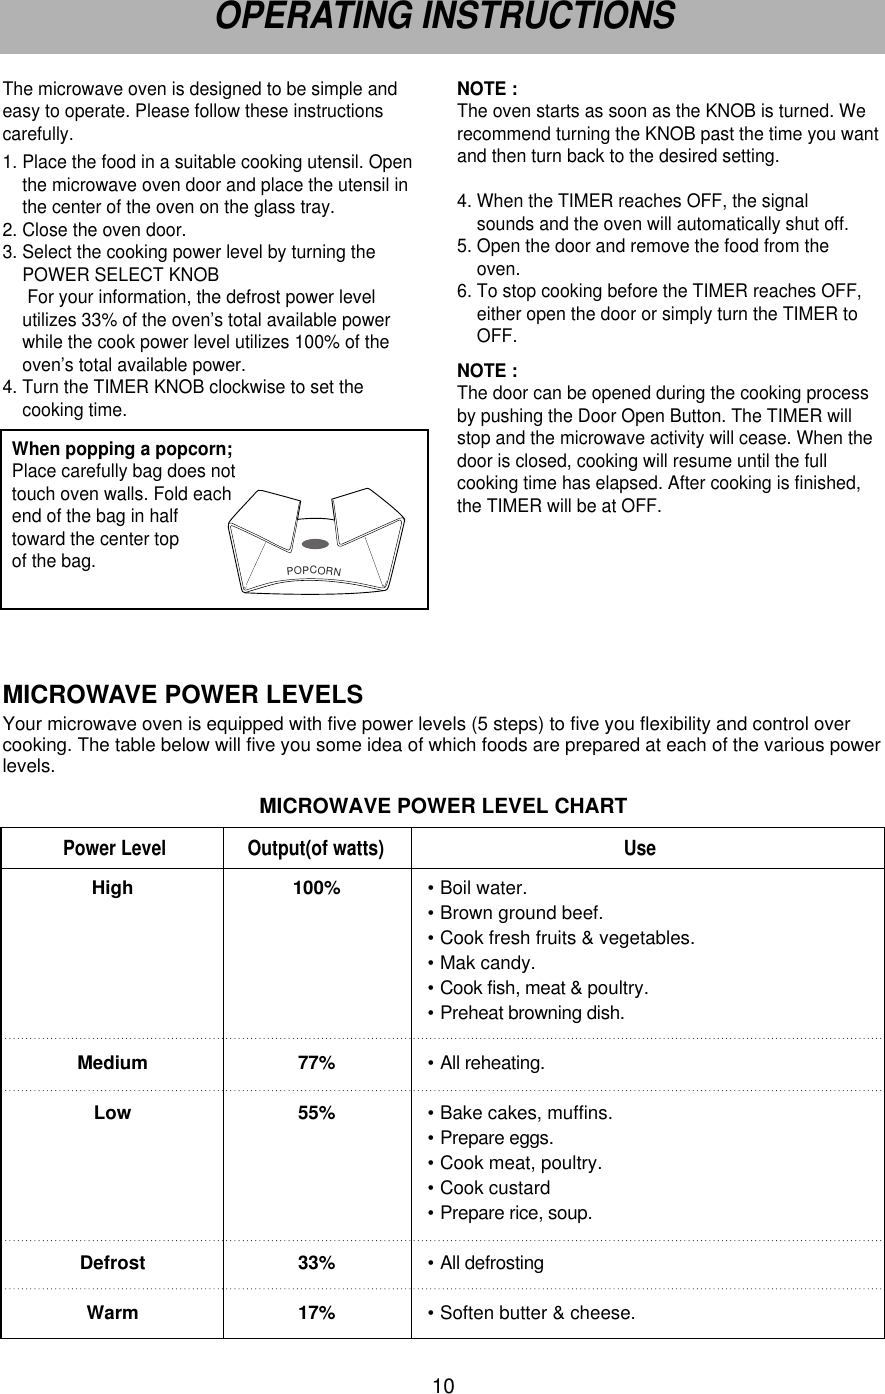 MICROWAVE POWER LEVELSYour microwave oven is equipped with five power levels (5 steps) to five you flexibility and control overcooking. The table below will five you some idea of which foods are prepared at each of the various powerlevels.MICROWAVE POWER LEVEL CHART10OPERATING INSTRUCTIONSPower Level Output(of watts) Use•Boil water.•Brown ground beef.•Cook fresh fruits &amp; vegetables.•Mak candy.•Cook fish, meat &amp; poultry.•Preheat browning dish.•All reheating.•Bake cakes, muffins.•Prepare eggs.•Cook meat, poultry.•Cook custard•Prepare rice, soup.•All defrosting•Soften butter &amp; cheese.HighMediumLowDefrostWarm100%77%55%33%17%The microwave oven is designed to be simple andeasy to operate. Please follow these instructionscarefully.1. Place the food in a suitable cooking utensil. Openthe microwave oven door and place the utensil inthe center of the oven on the glass tray.2. Close the oven door.3. Select the cooking power level by turning thePOWER SELECT KNOB For your information, the defrost power levelutilizes 33% of the oven’s total available powerwhile the cook power level utilizes 100% of theoven’s total available power. 4. Turn the TIMER KNOB clockwise to set the cooking time.NOTE : The oven starts as soon as the KNOB is turned. Werecommend turning the KNOB past the time you wantand then turn back to the desired setting.4. When the TIMER reaches OFF, the signalsounds and the oven will automatically shut off.5. Open the door and remove the food from theoven.6. To stop cooking before the TIMER reaches OFF,either open the door or simply turn the TIMER toOFF.NOTE :The door can be opened during the cooking processby pushing the Door Open Button. The TIMER willstop and the microwave activity will cease. When thedoor is closed, cooking will resume until the fullcooking time has elapsed. After cooking is finished,the TIMER will be at OFF.POPCORNWhen popping a popcorn; Place carefully bag does nottouch oven walls. Fold eachend of the bag in half toward the center top of the bag.